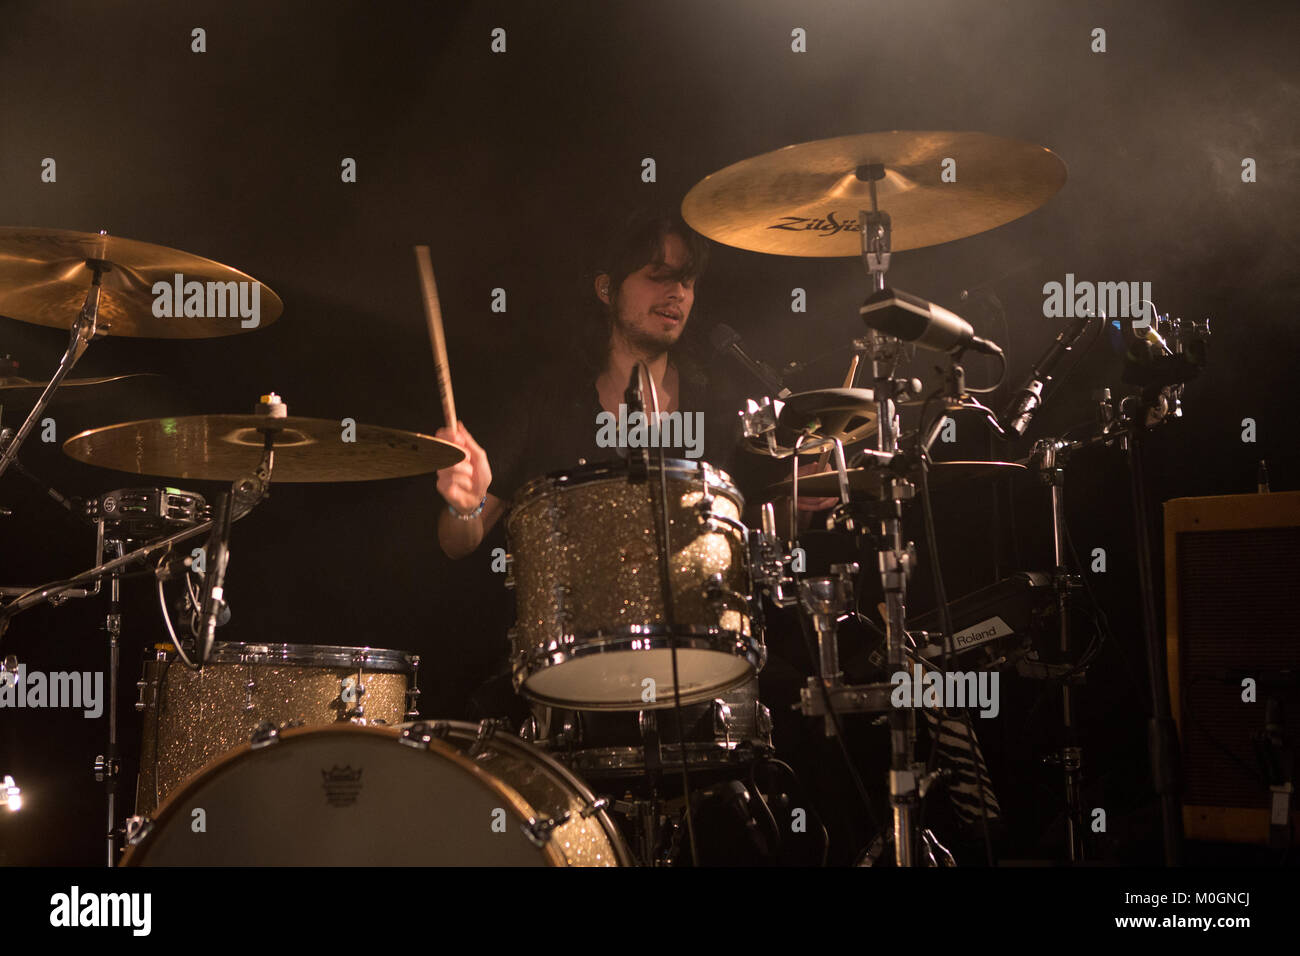 Oslo, Norway. 21st Jan, 2018. The British alternative rock band Wolf Alice performs a live concert at John Dee in Oslo. Here drummer Joel Amey is seen live on stage. (Photo Credit: Gonzales Photo/Alamy Live News Stock Photo